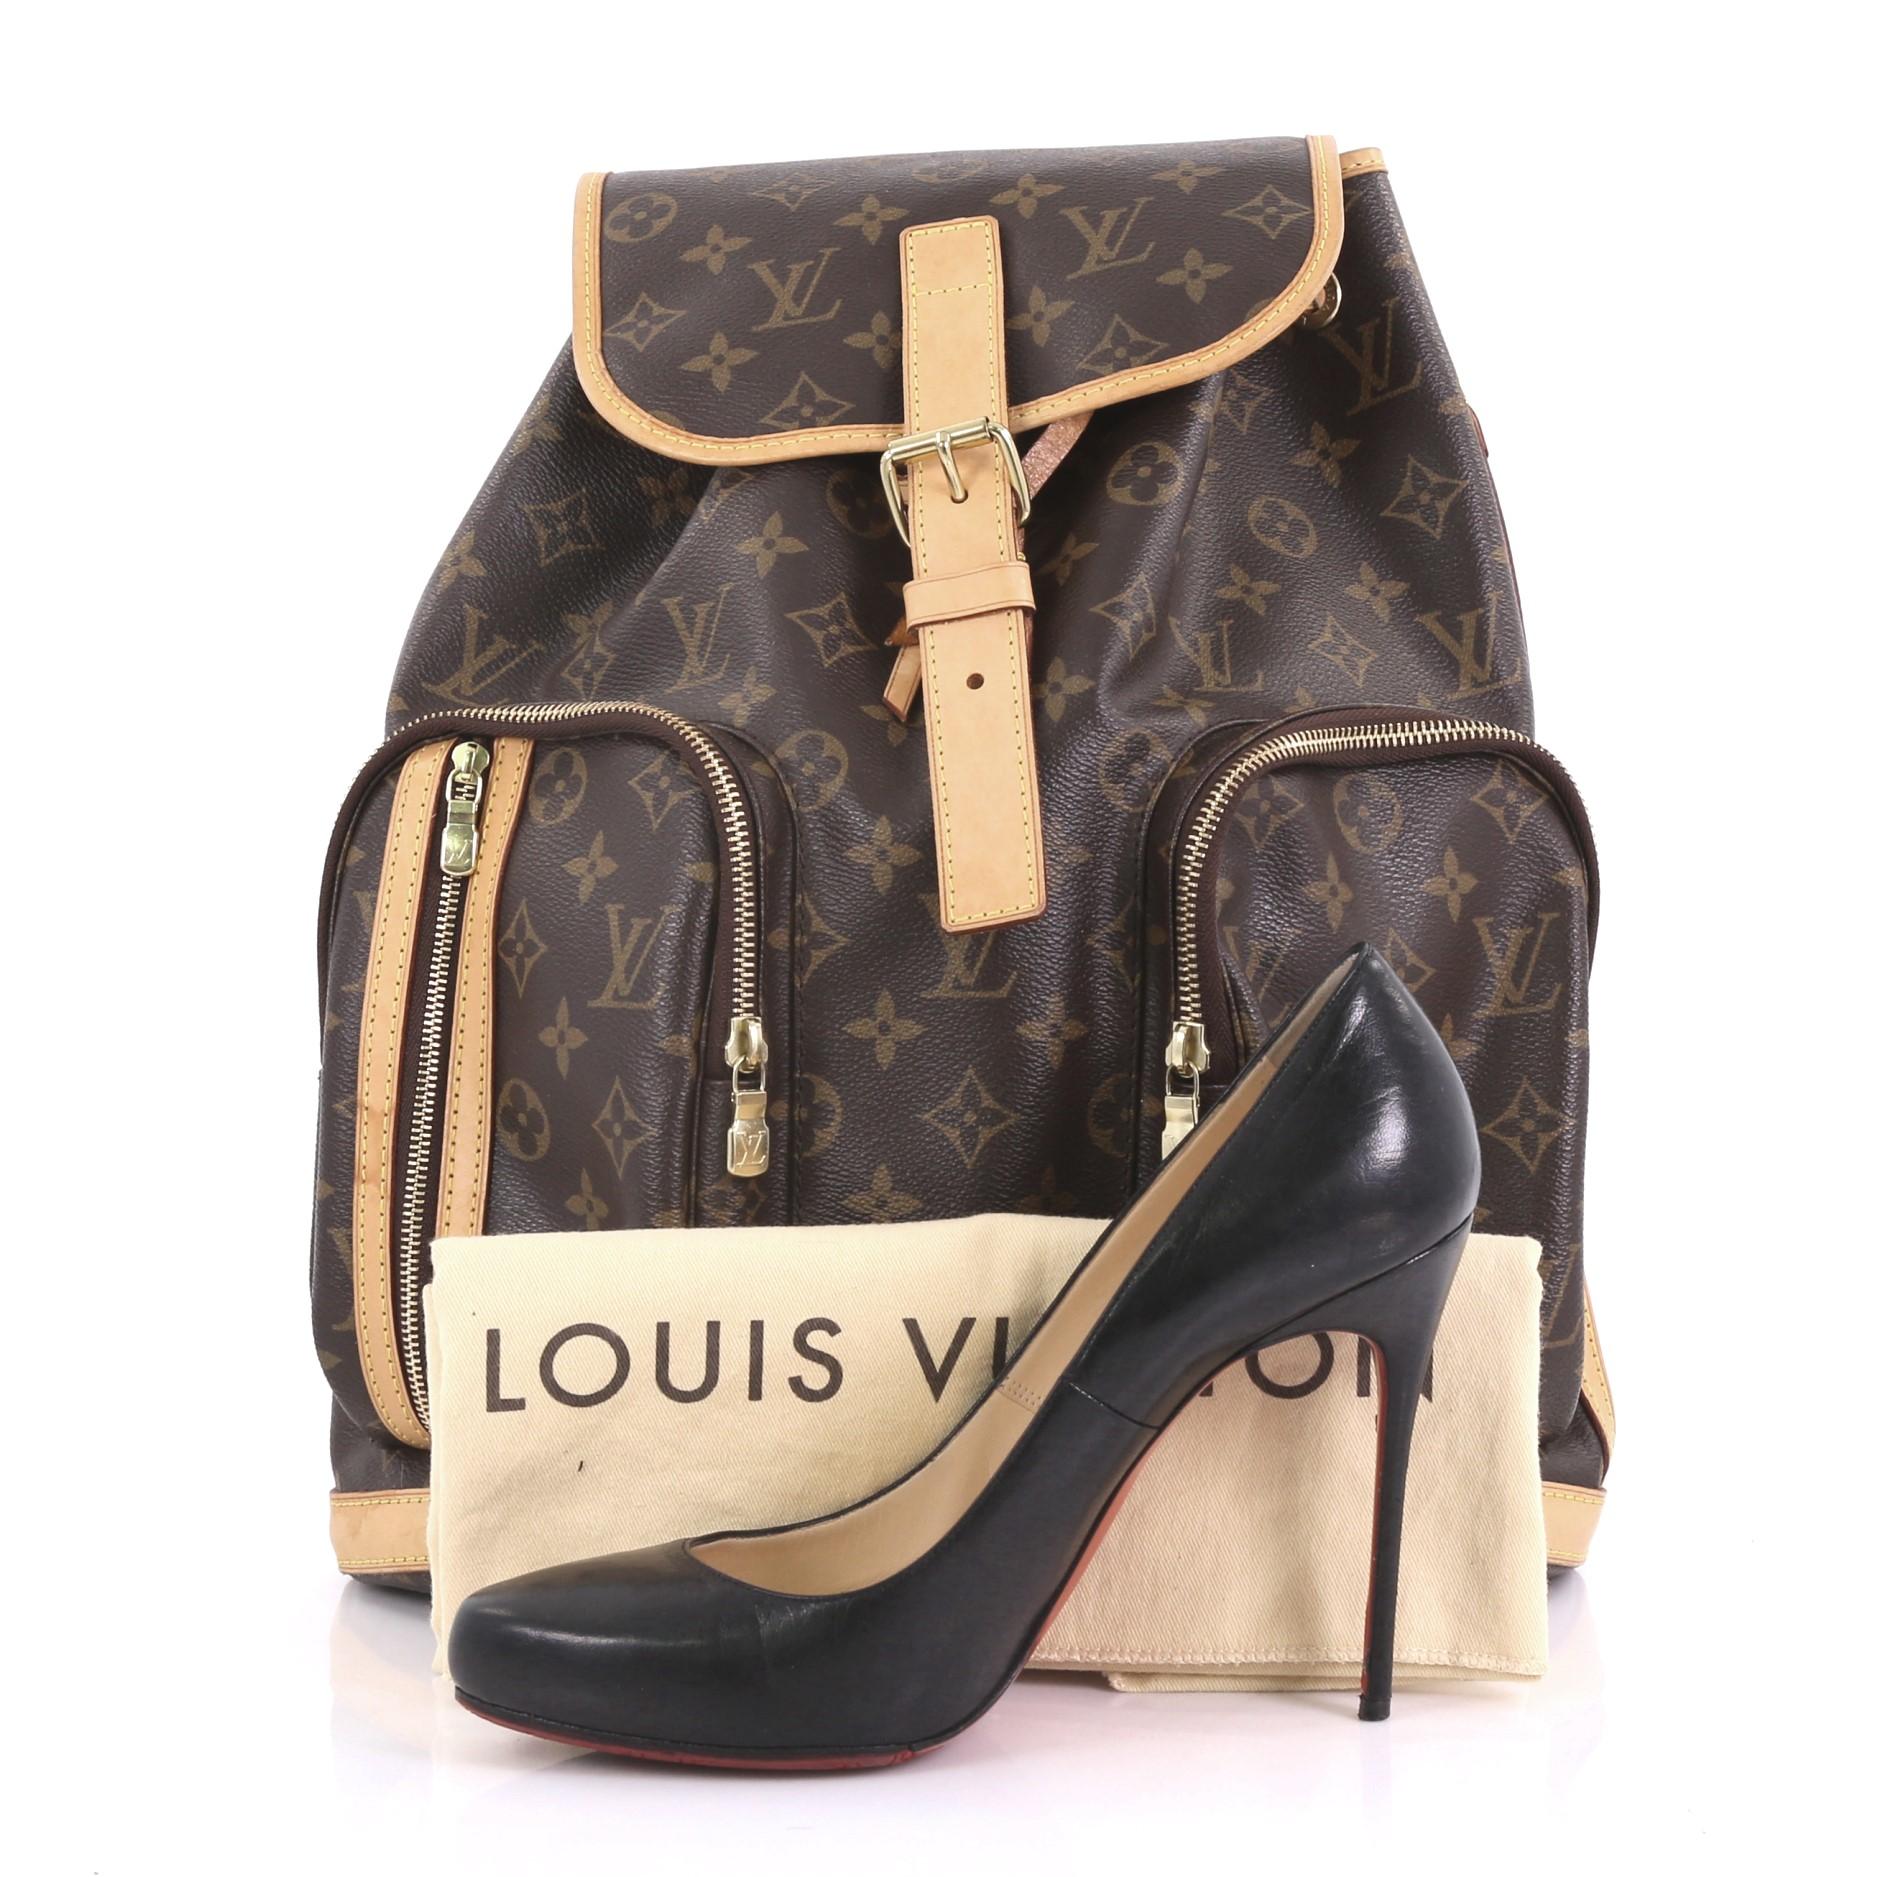 This Louis Vuitton Bosphore Backpack Monogram Canvas, crafted from brown monogram coated canvas with vachetta leather trim, features exterior front zip pockets, dual adjustable canvas straps, and gold-tone hardware. Its top flap with belt and